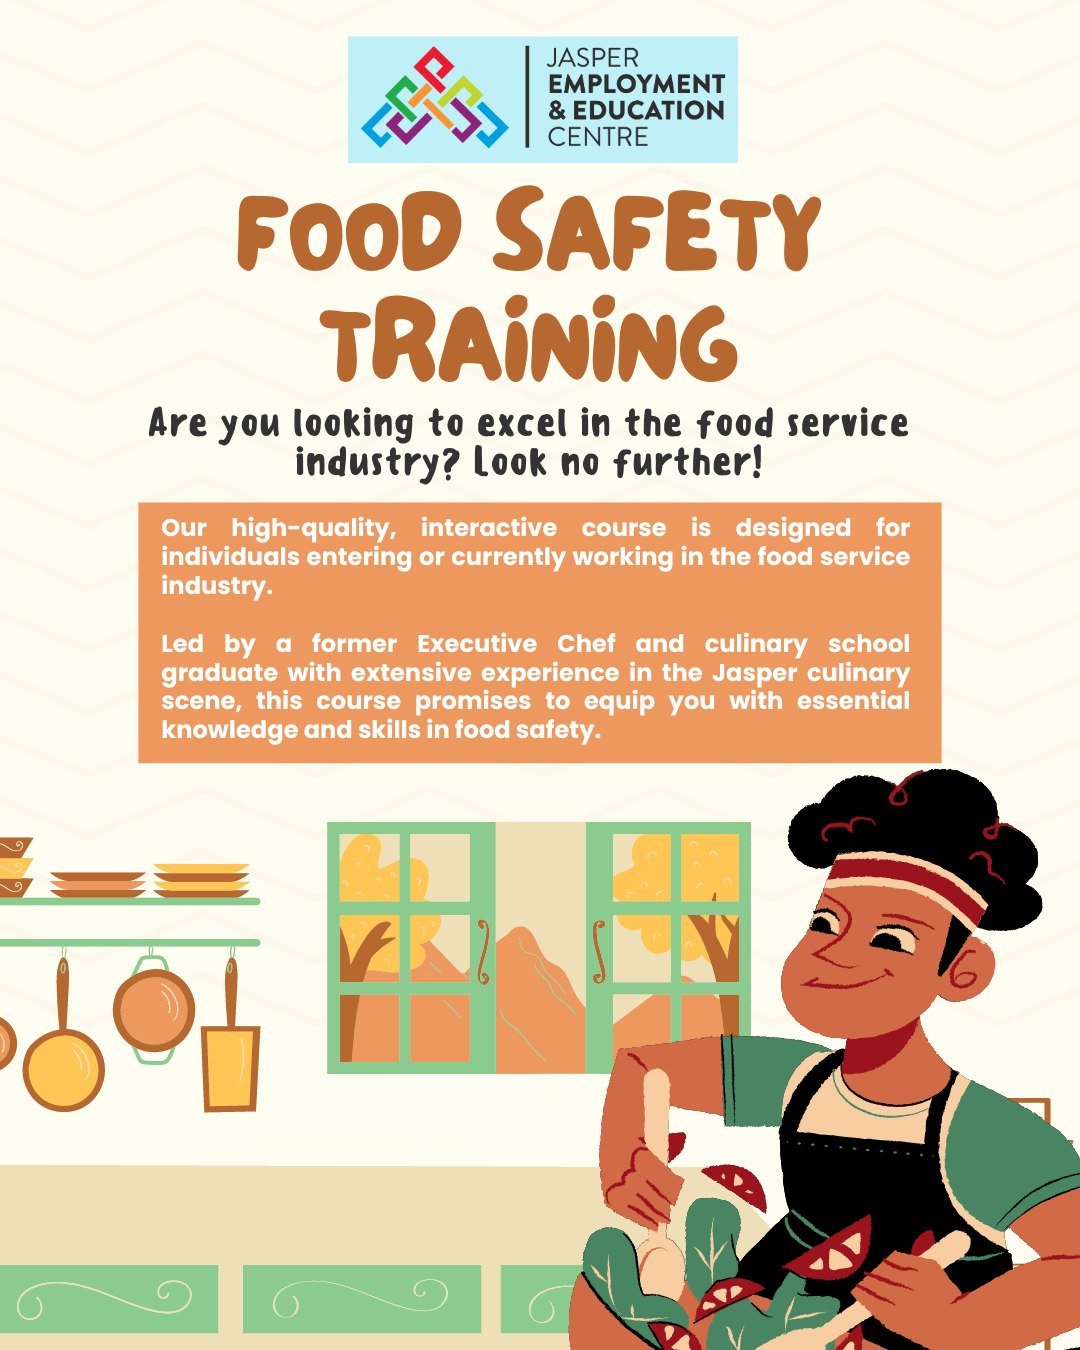 🔥 Elevate your culinary career with our Food Safety Training! 🍳 
Join us for an interactive one-day course led by a former Executive Chef and culinary expert. 
Gain essential skills, hands-on experience, and a provincially recognized certificate. C